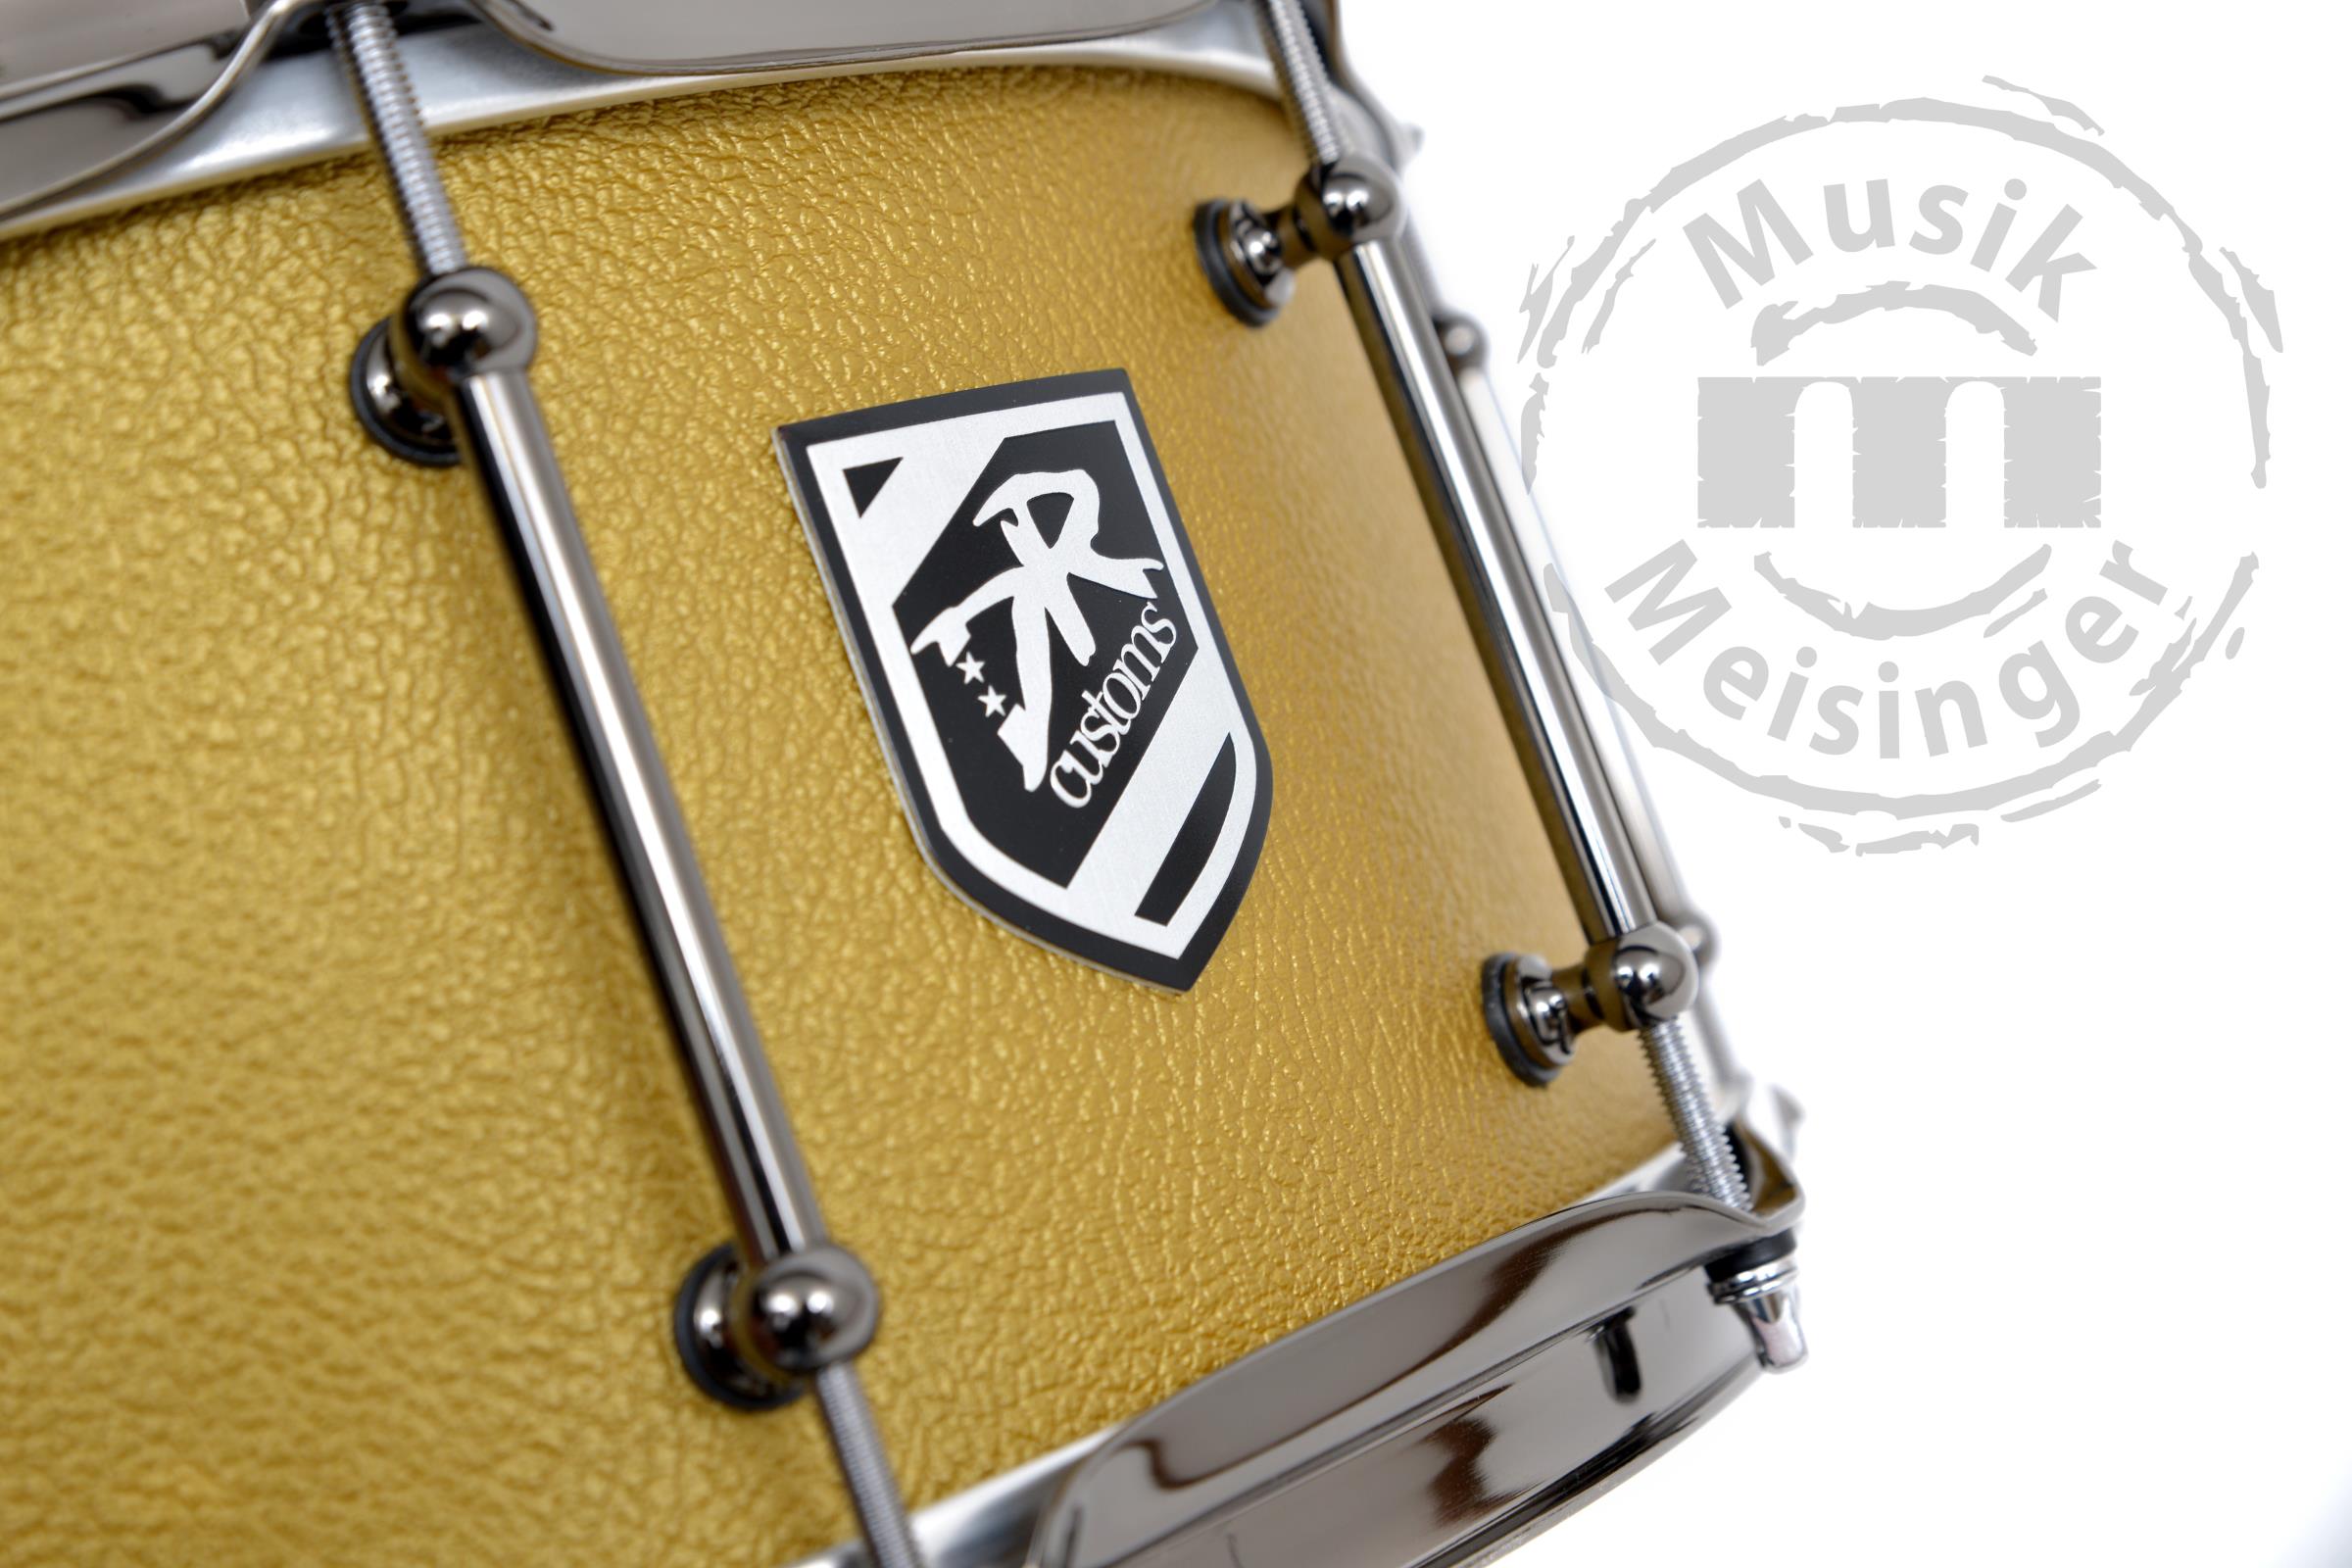 DR Customs Snare 14x6,5 Gold